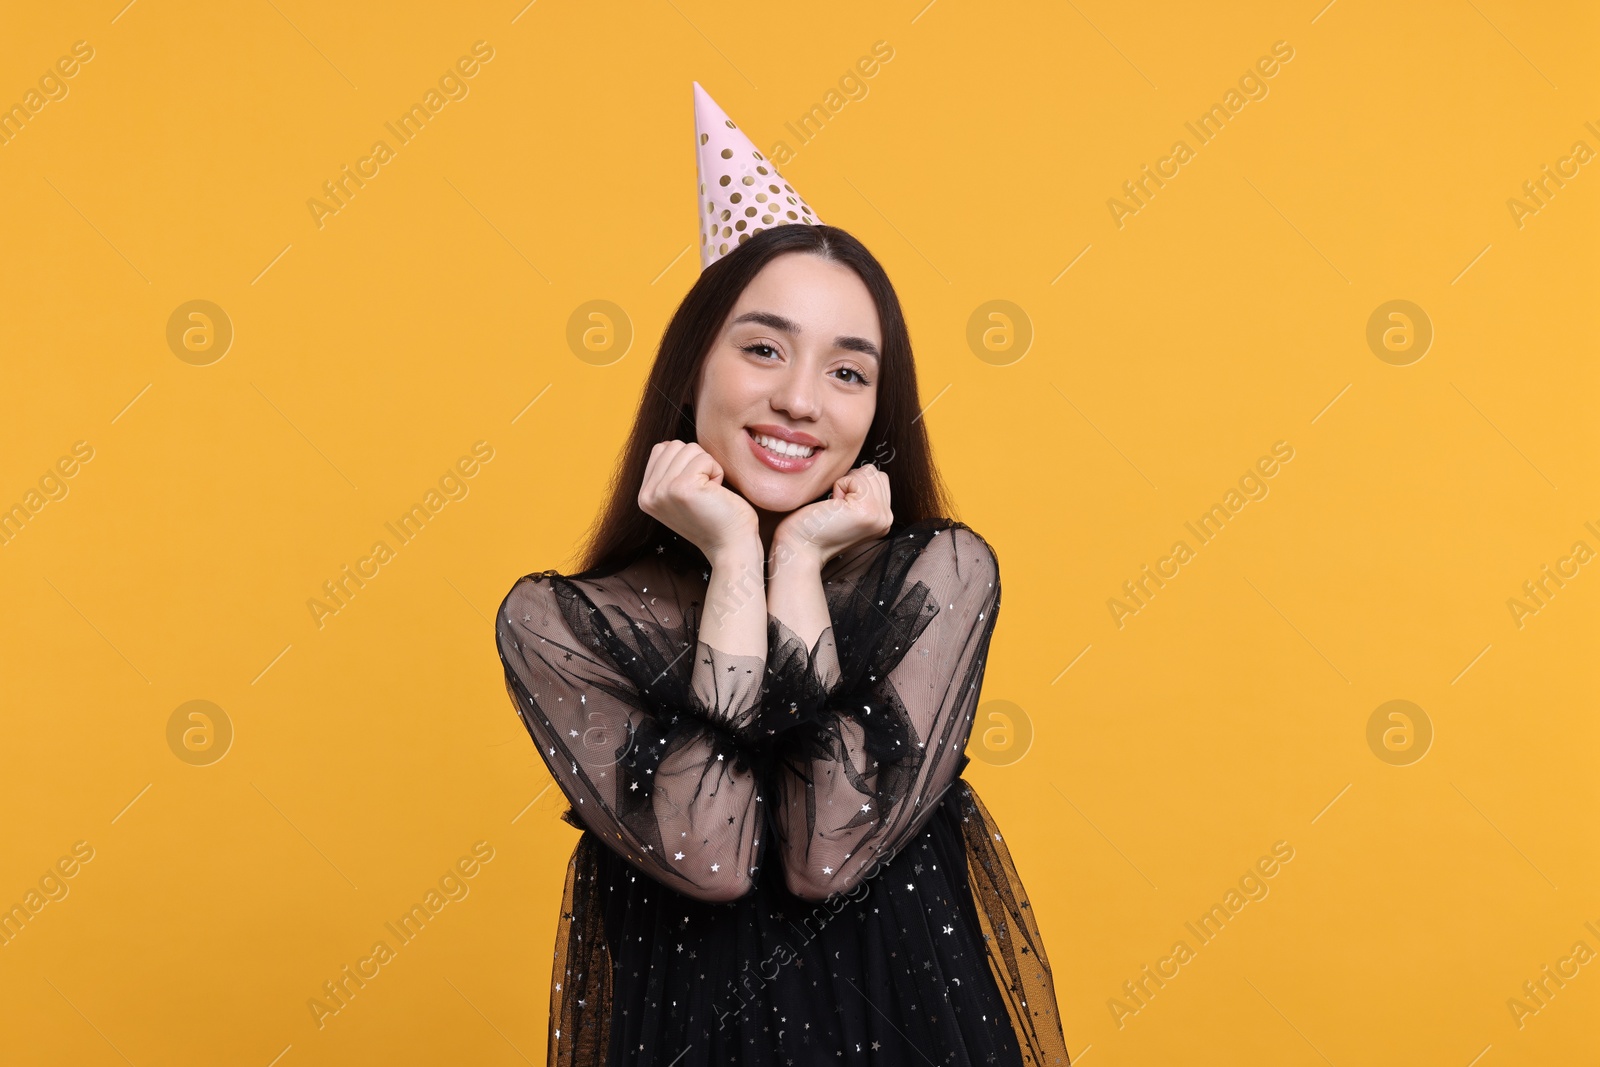 Photo of Happy woman in party hat on orange background